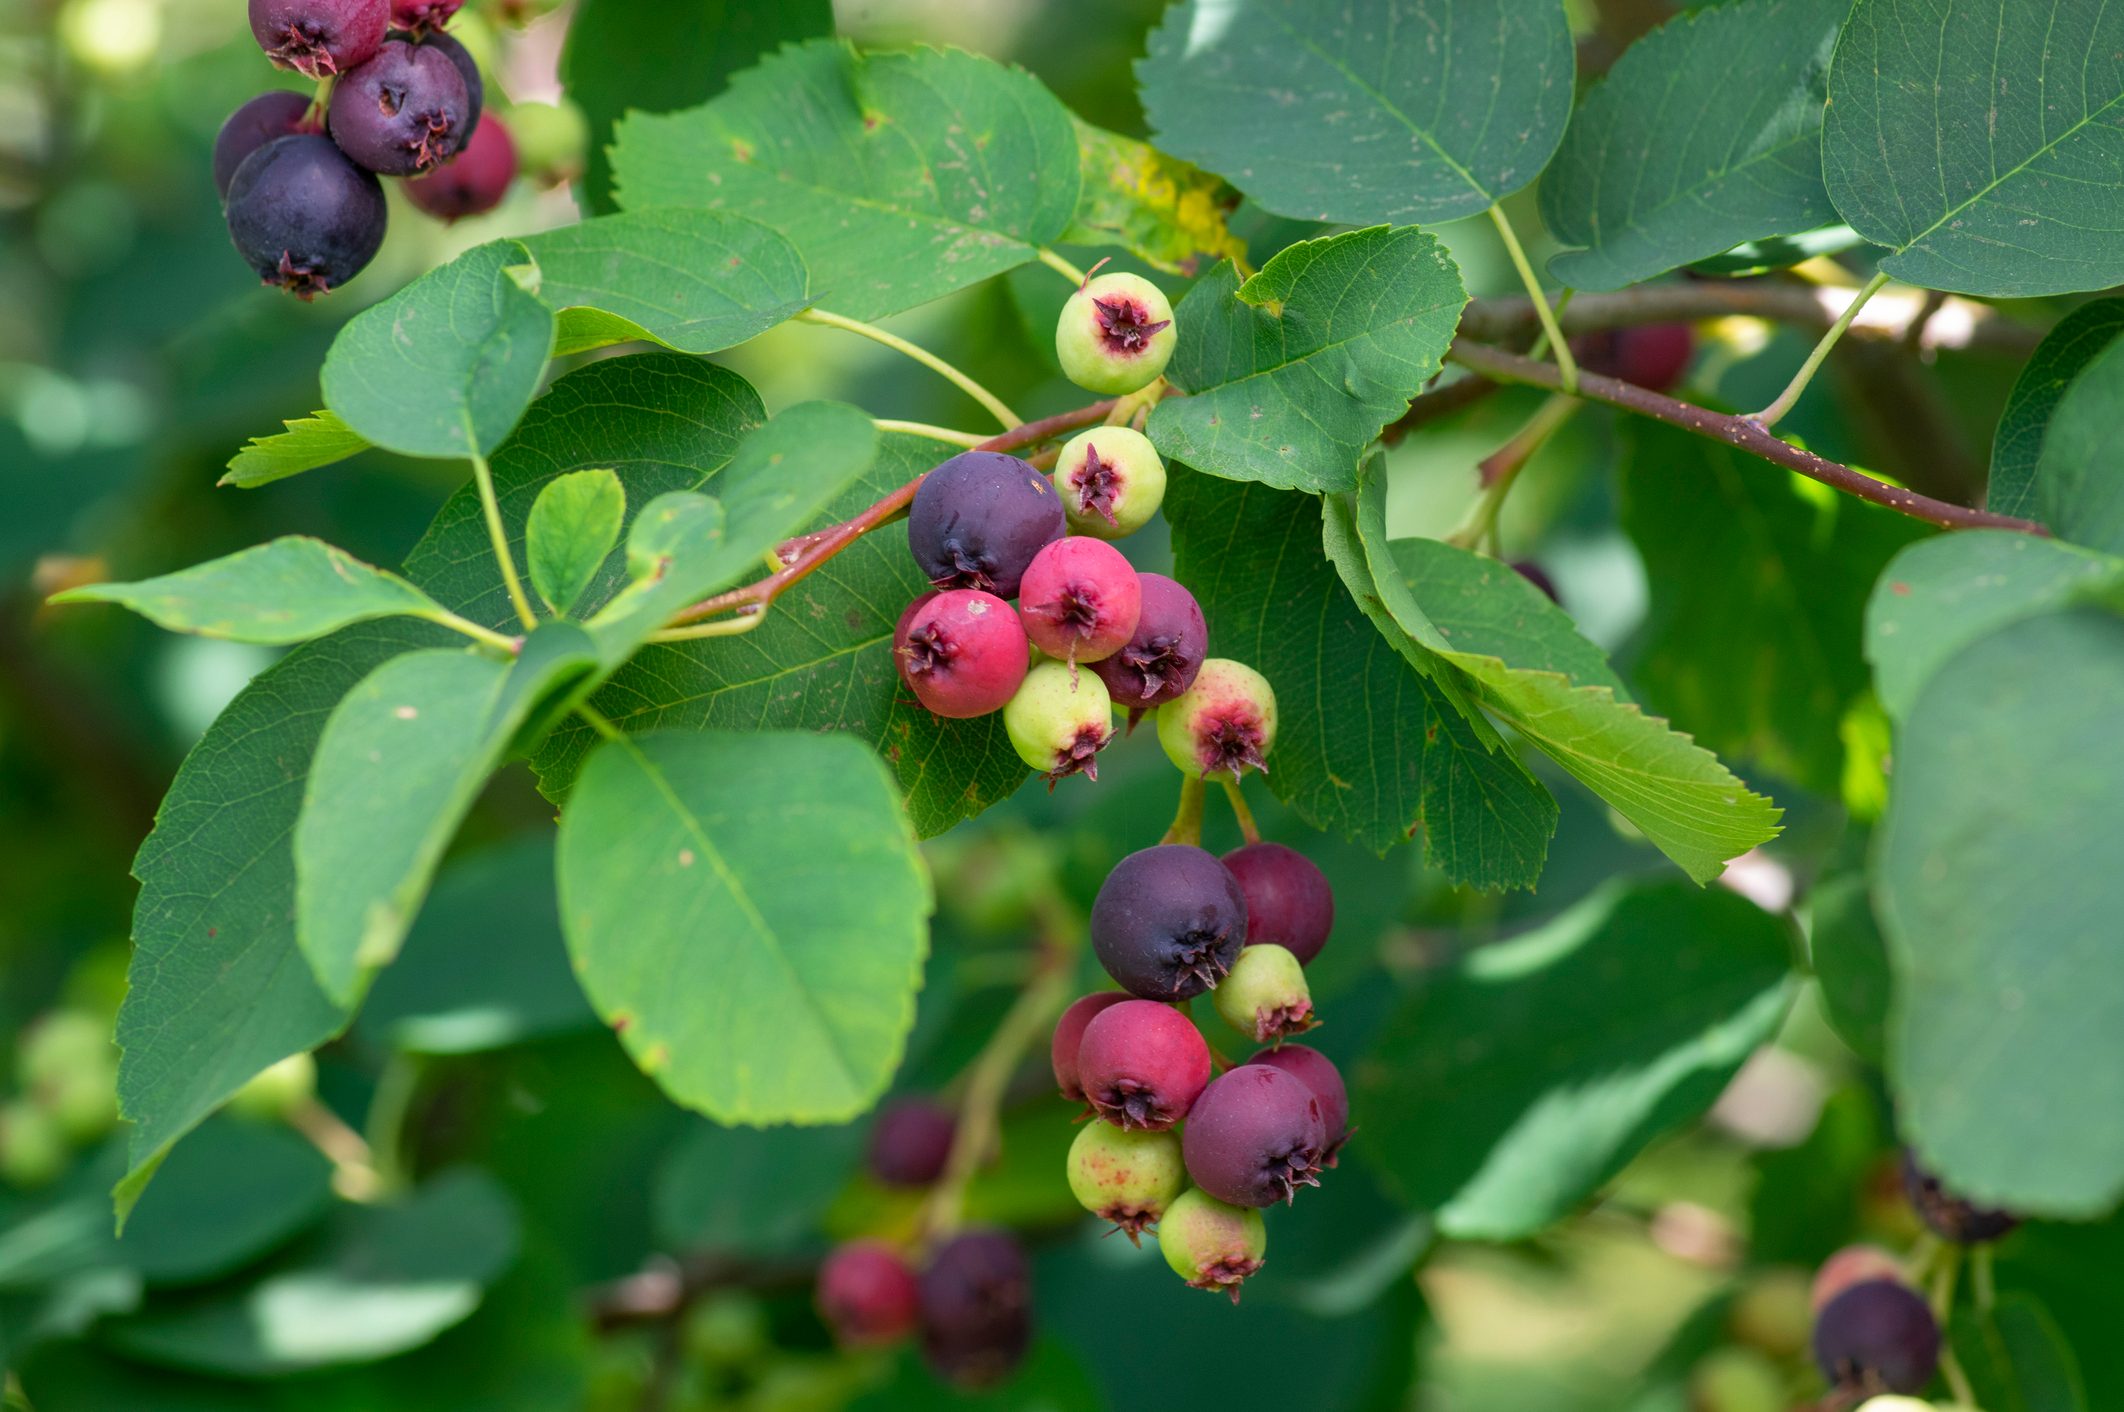 <p>Serviceberries are good for medium-sized yards. They can grow to 30 feet, but more often end up as <a href="https://www.familyhandyman.com/list/shrubs-for-shade/" rel="noopener noreferrer">multi-stemmed shrubs</a> half that size. Their early-spring blooms are great for bees, plus they're a host plant for swallowtail and other butterflies.</p> <p>Their berries bring dozens of bird species, from cedar waxwings to cardinals and mockingbirds. The fruits, edible for humans, are often used in jams and pies.</p> <p>Serviceberries grow in much of the U.S., with native species and their sun and shade needs varying by region. The downy serviceberry occupies a wide range from Florida to Maine, whereas the Saskatoon serviceberry thrives in the dry foothills of the Rocky Mountains.</p>